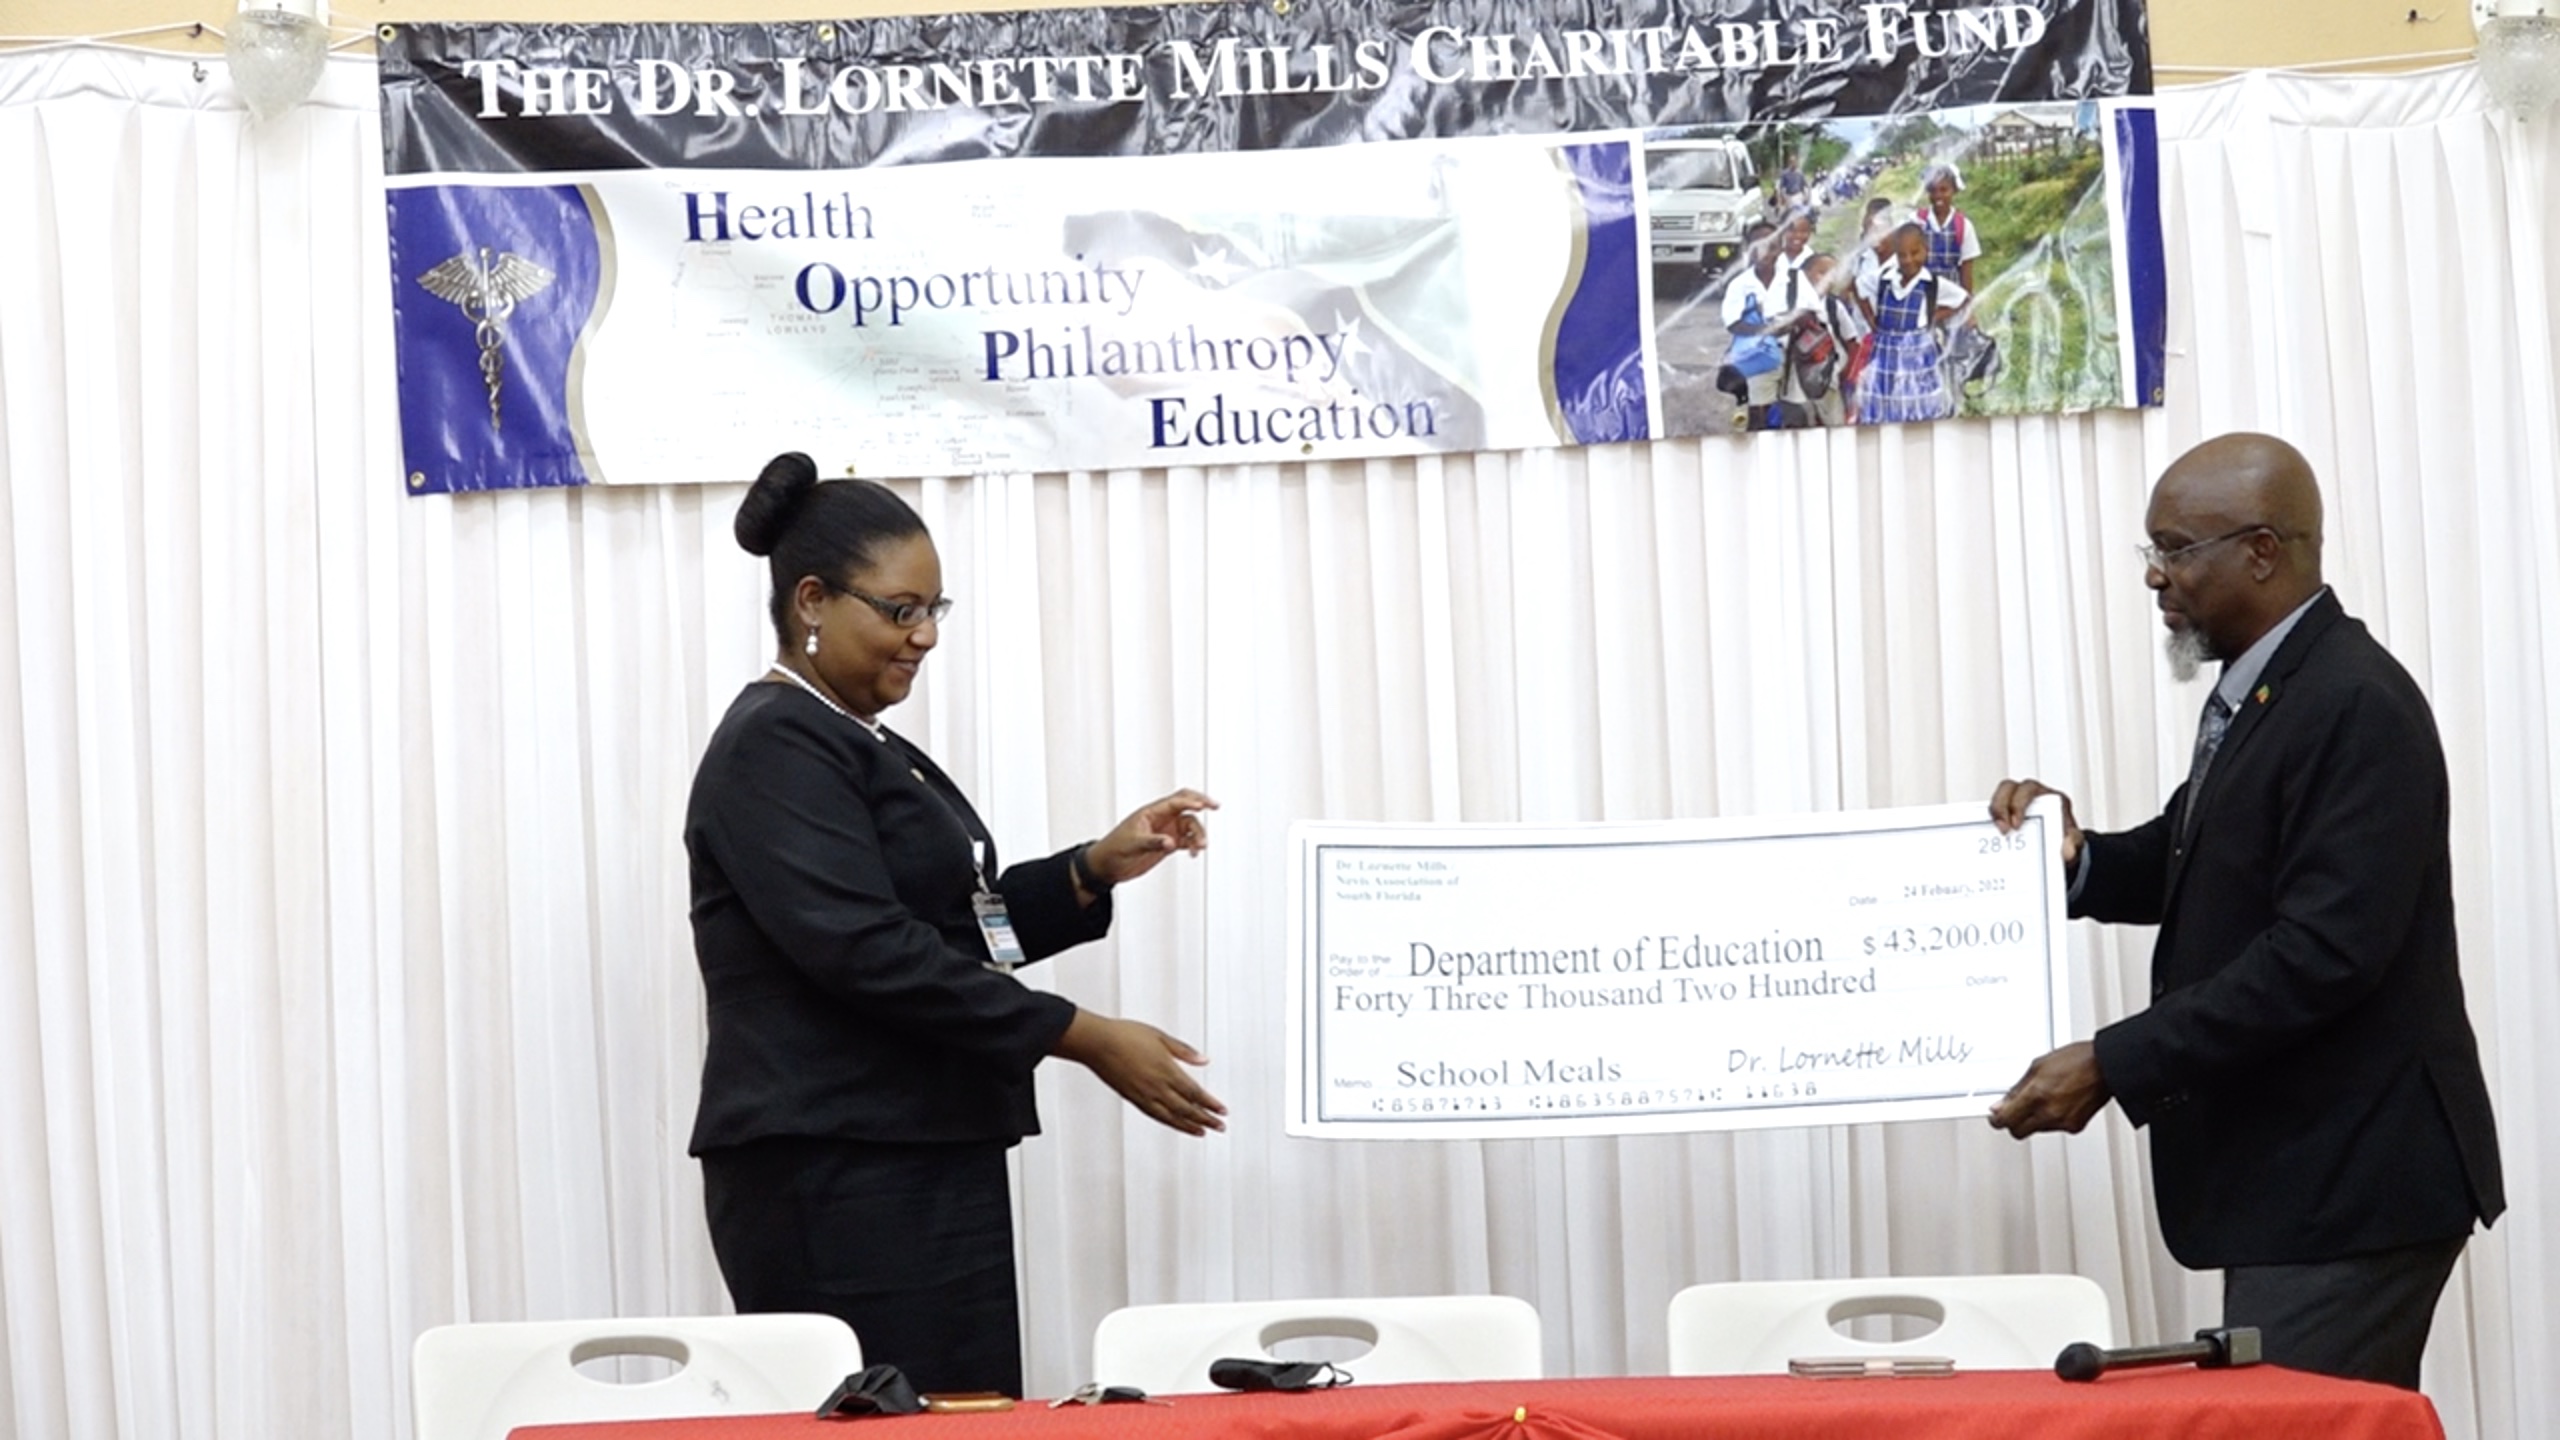 (l-r) Ms. Zahnela Claxton, Principal Education Officer in the Department of Education, receiving a cheque from the Dr. Lornette Mills Charitable Foundation through its representative Mr. Carlisle Powell on February 24, 2022, at a ceremony at the Jessups Community Centre